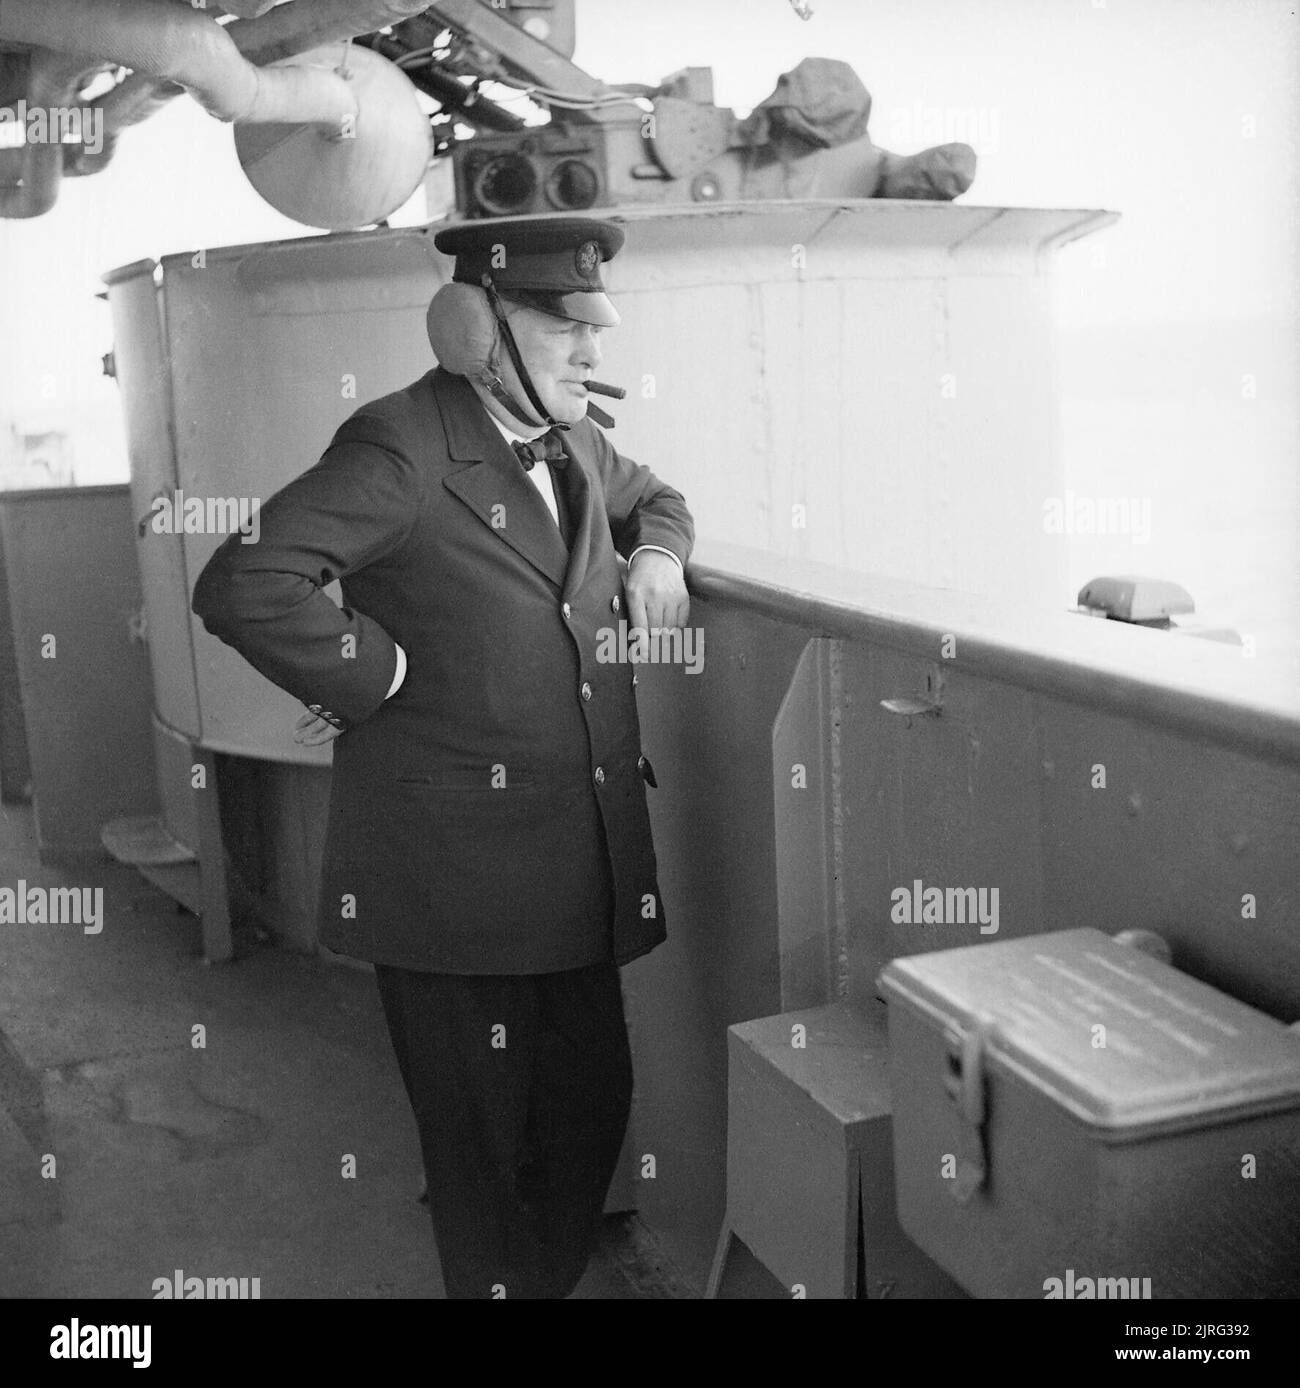 Winston Churchill wearing leather ear defenders watches gunnery practice on board HMS RENOWN whilst he was returning from Canada, September 1943. The Prime Minister Winston Churchill wearing leather earguards watching gunnery practice on board HMS RENOWN whilst he was returning from Canada. Stock Photo